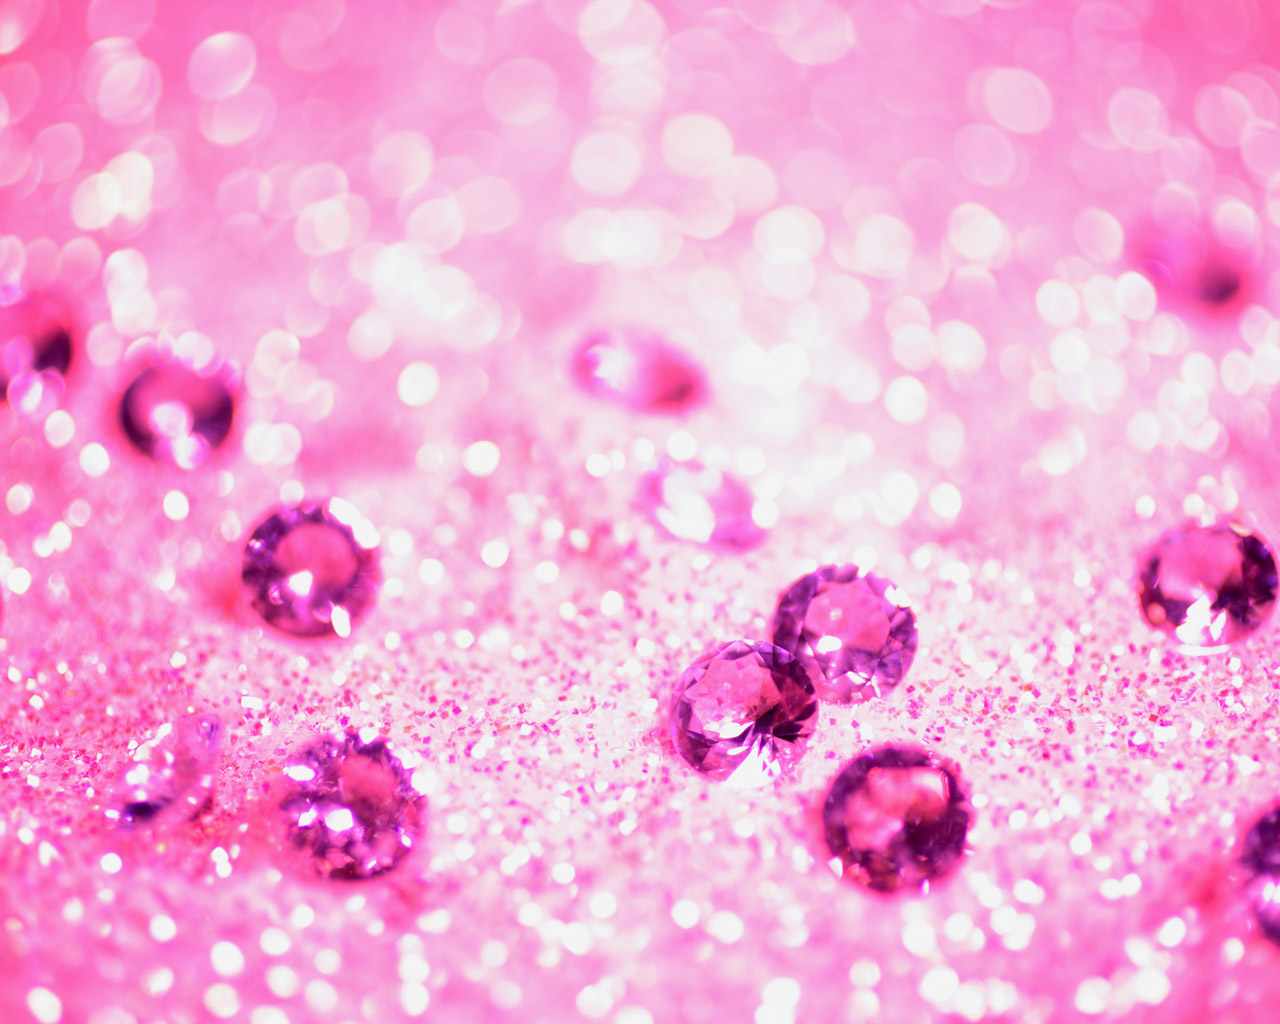 A close up of some pink jewels on the ground